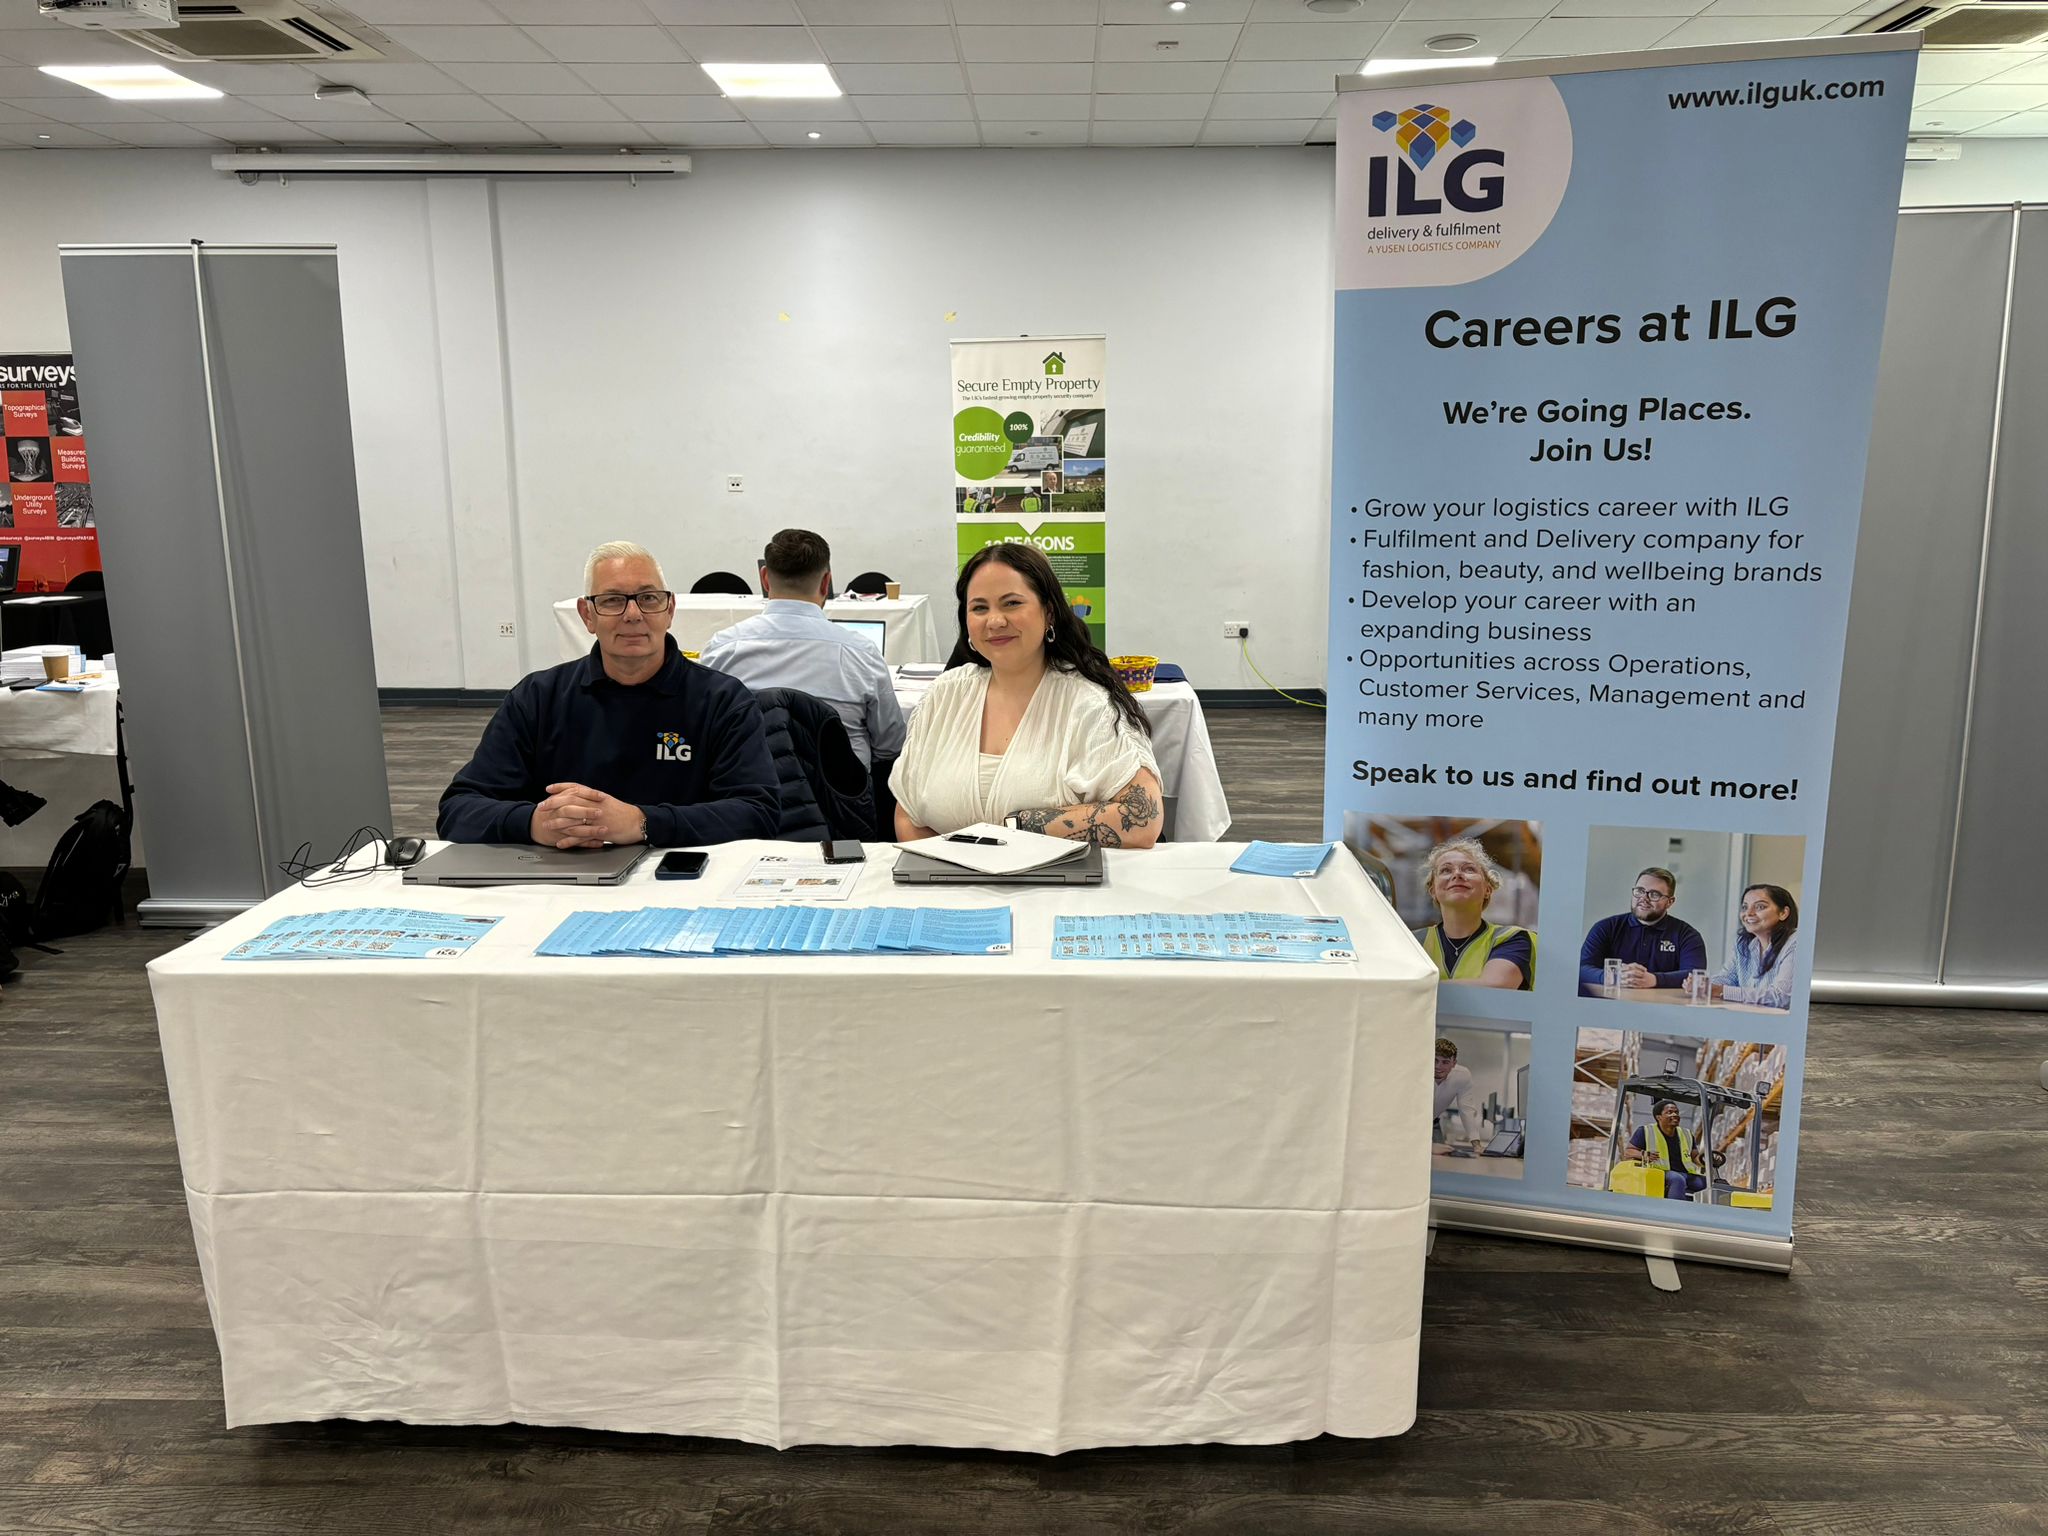 ILG Ltd at our event in Northampton